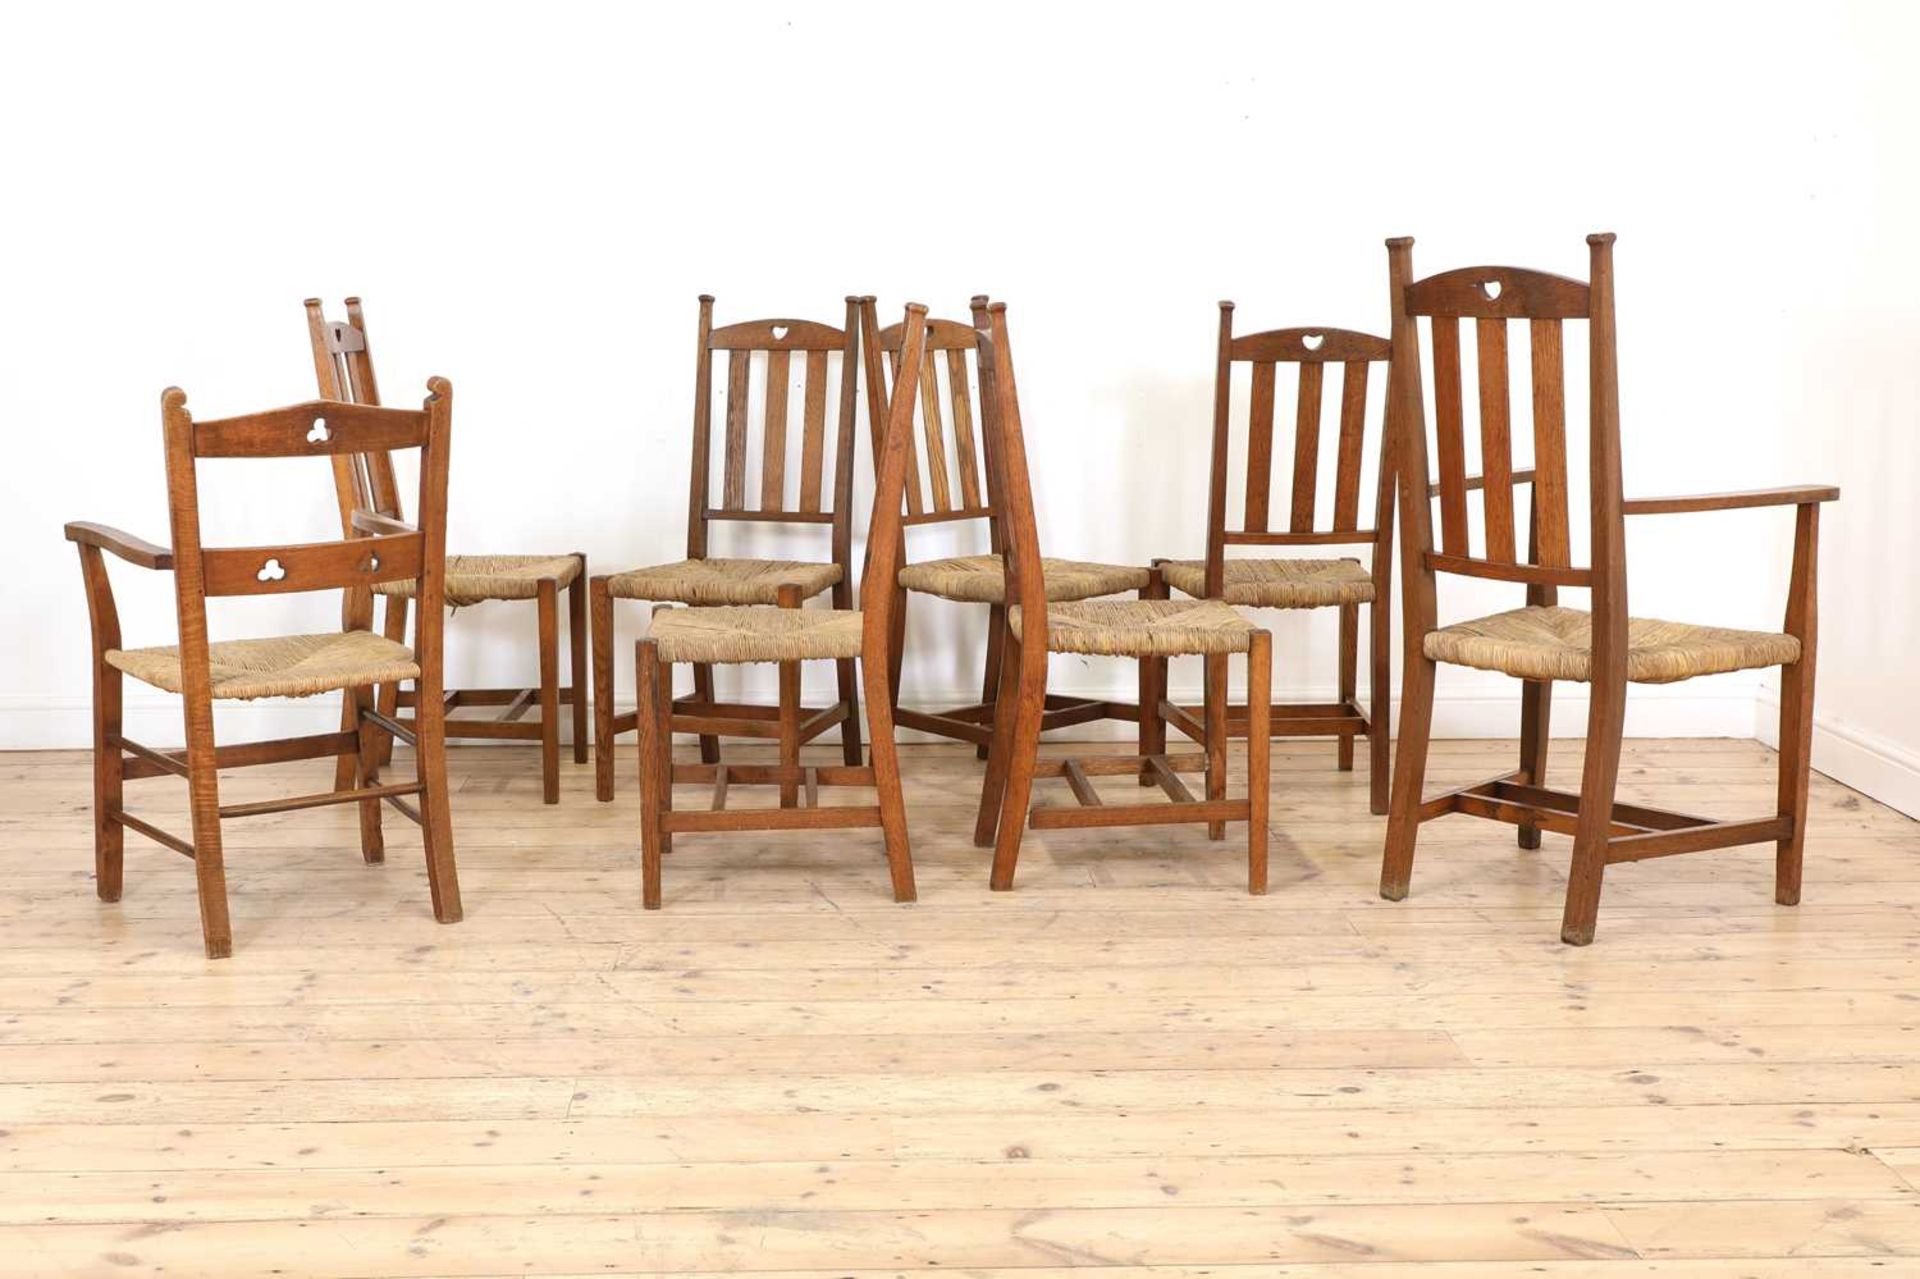 A set of six rush seat chairs and an armchair